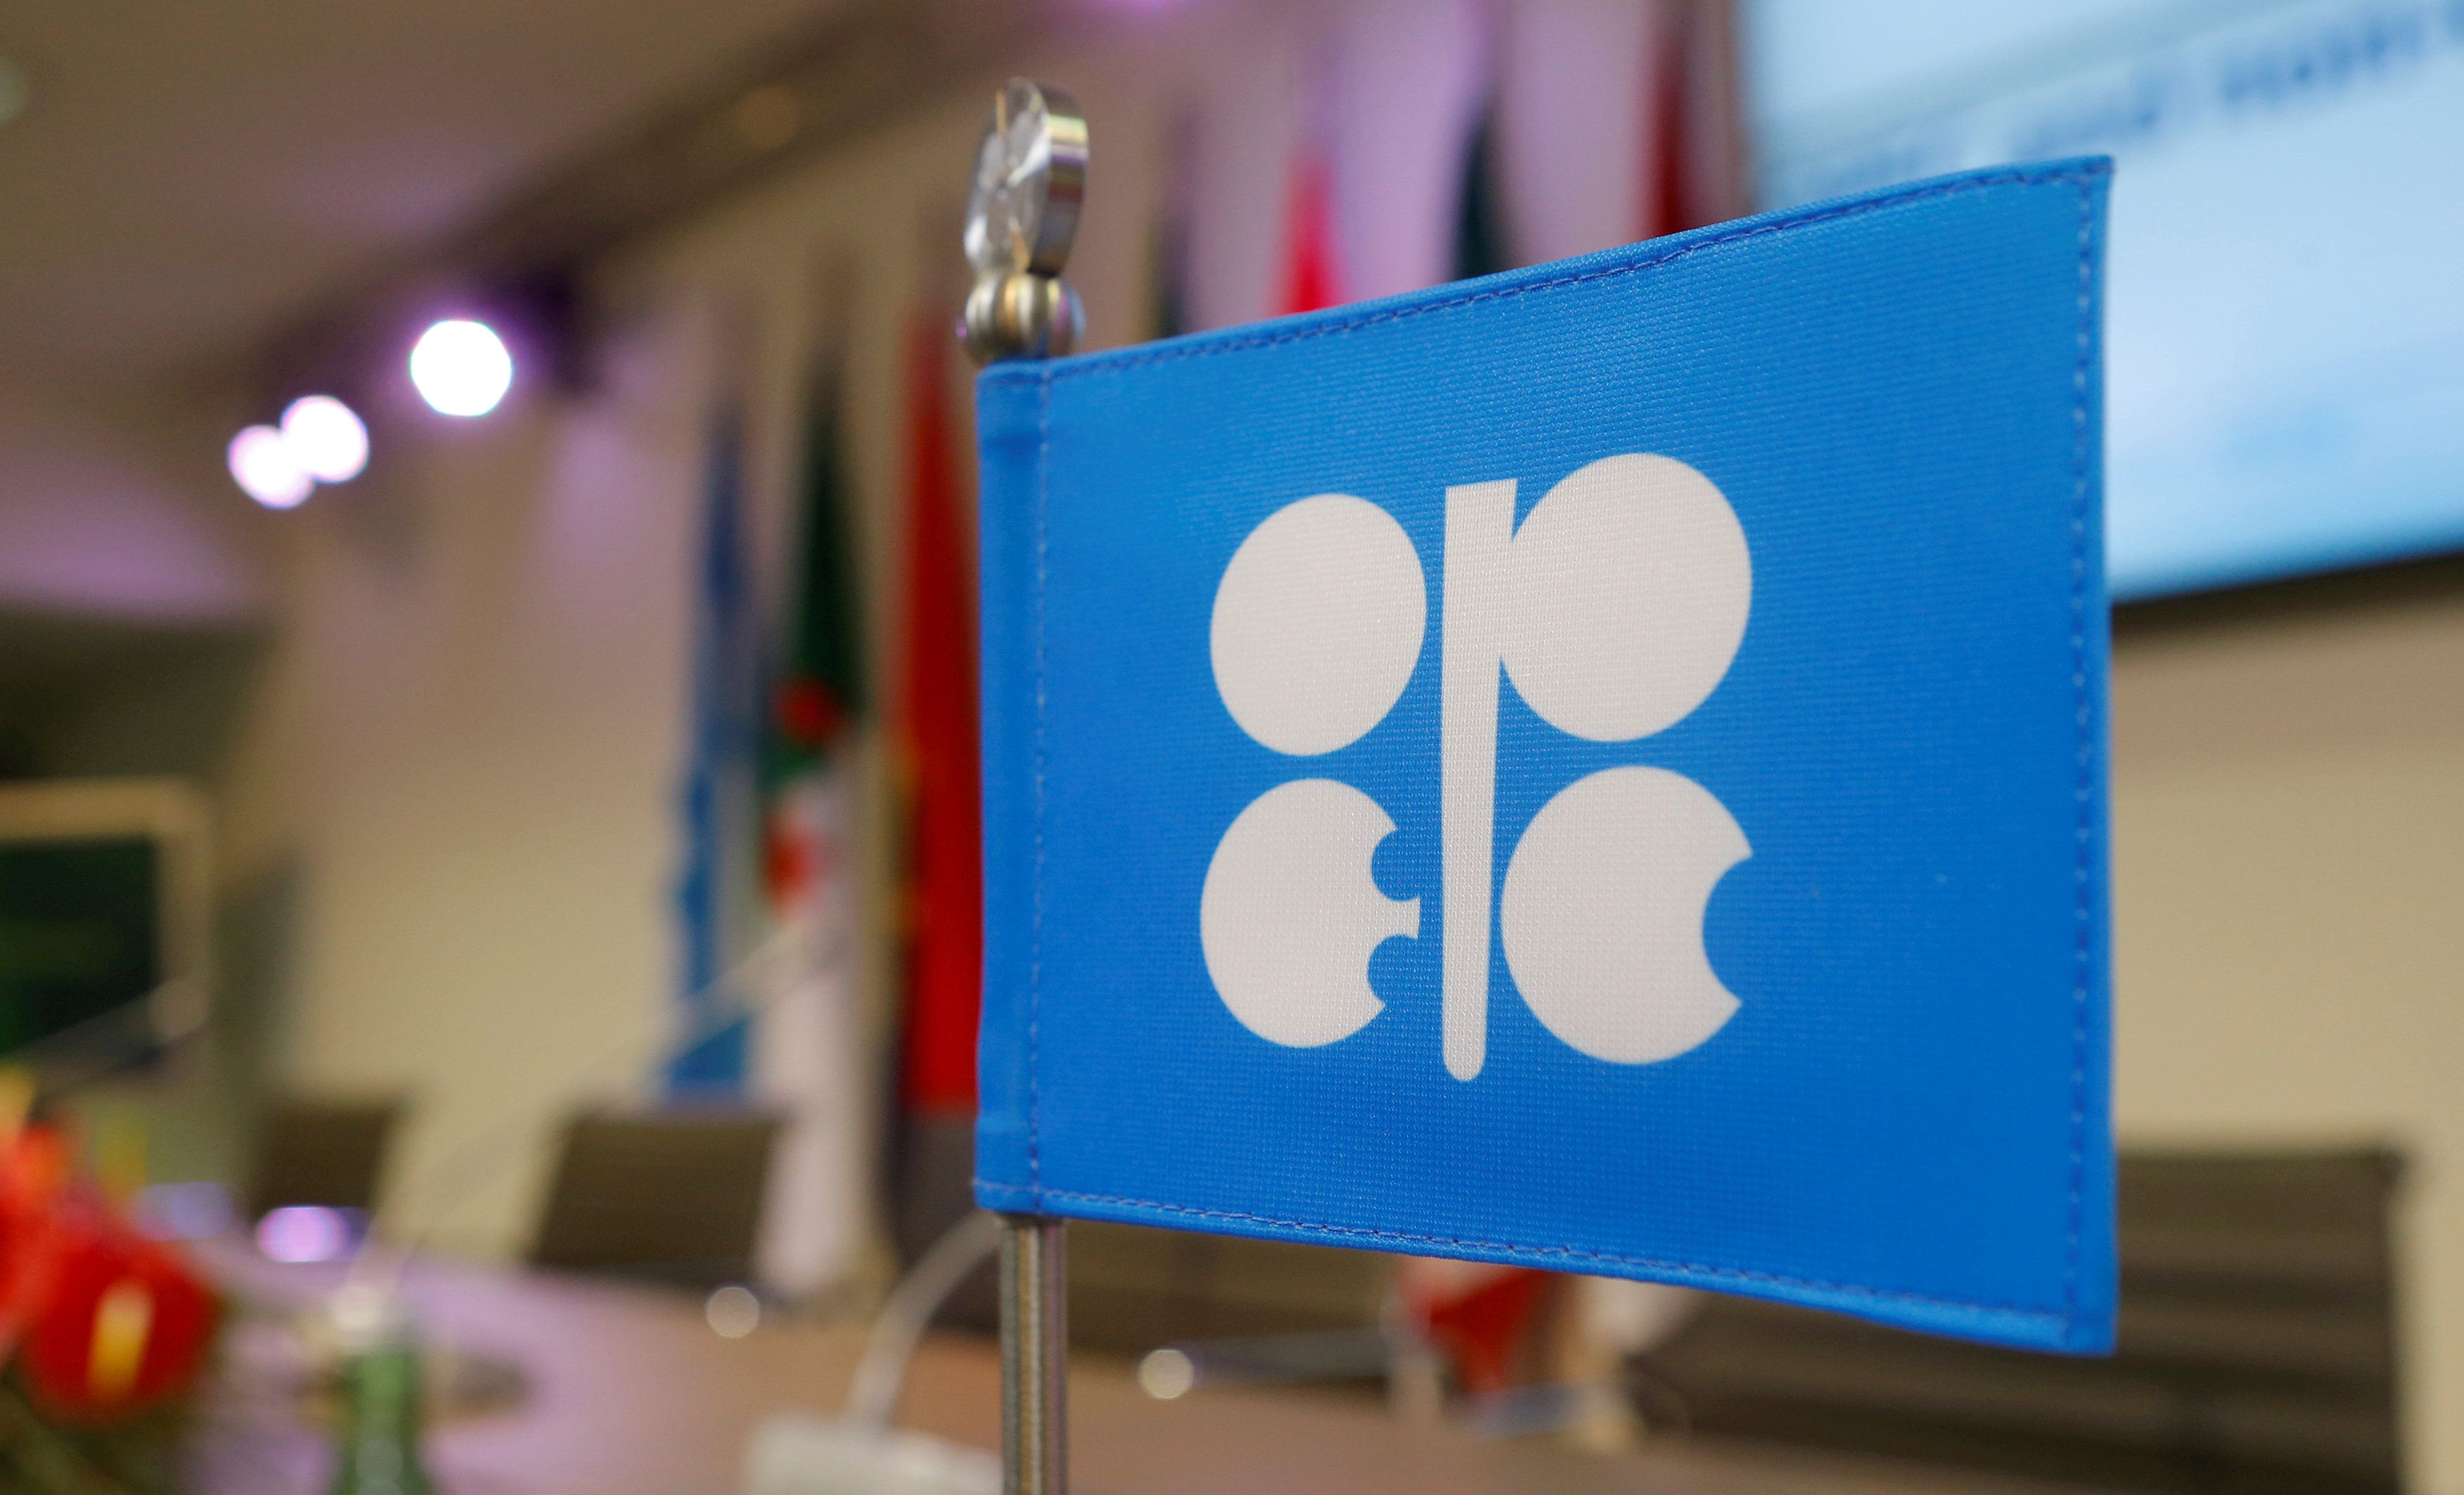 Opec's cheer over 2018 oil rally tinged by shale worries